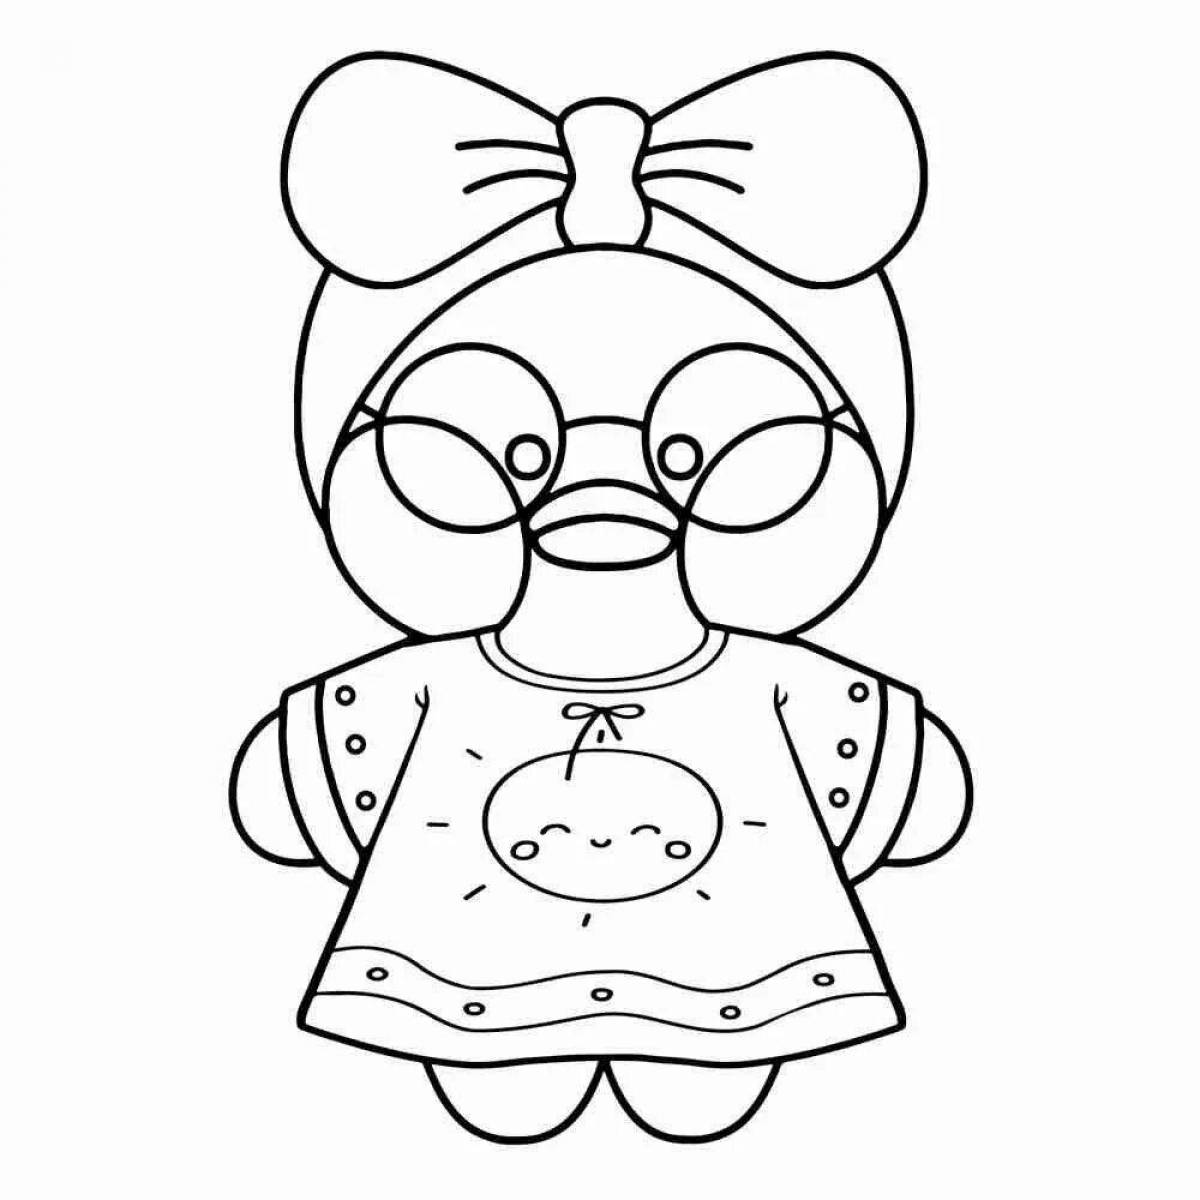 Color-explosion coloring page lalaphan duck with clothes